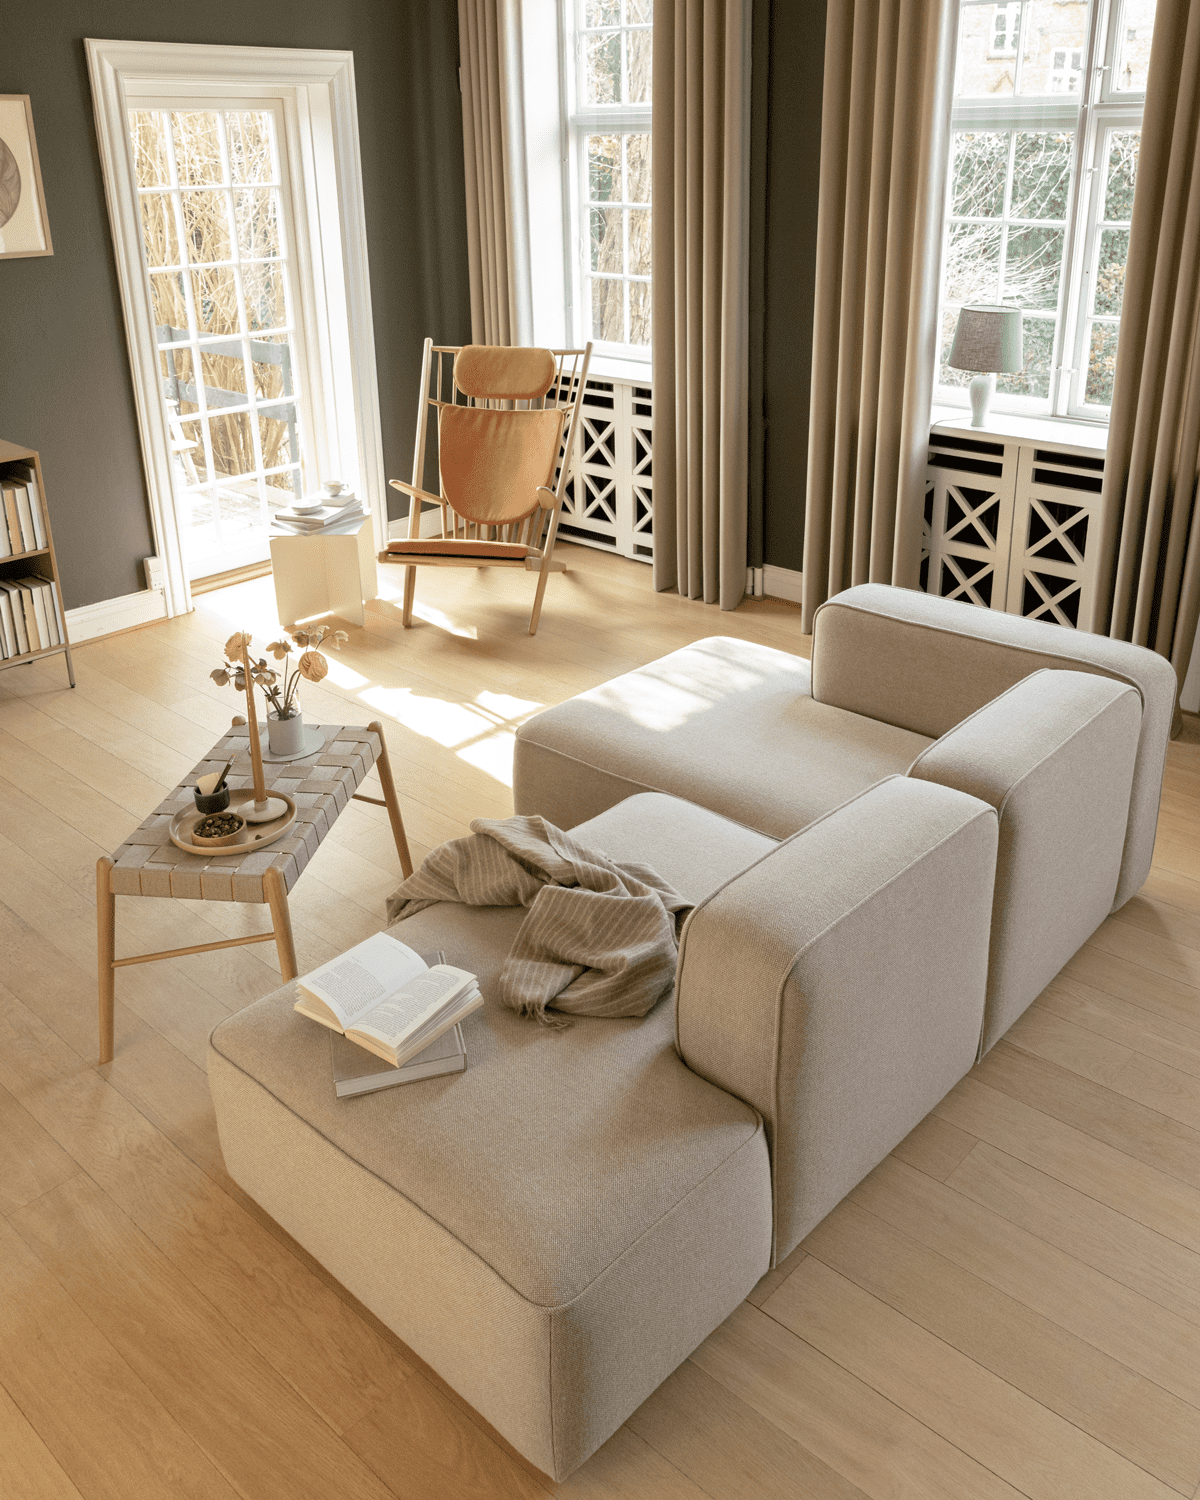 Beige sofa with chaise longue